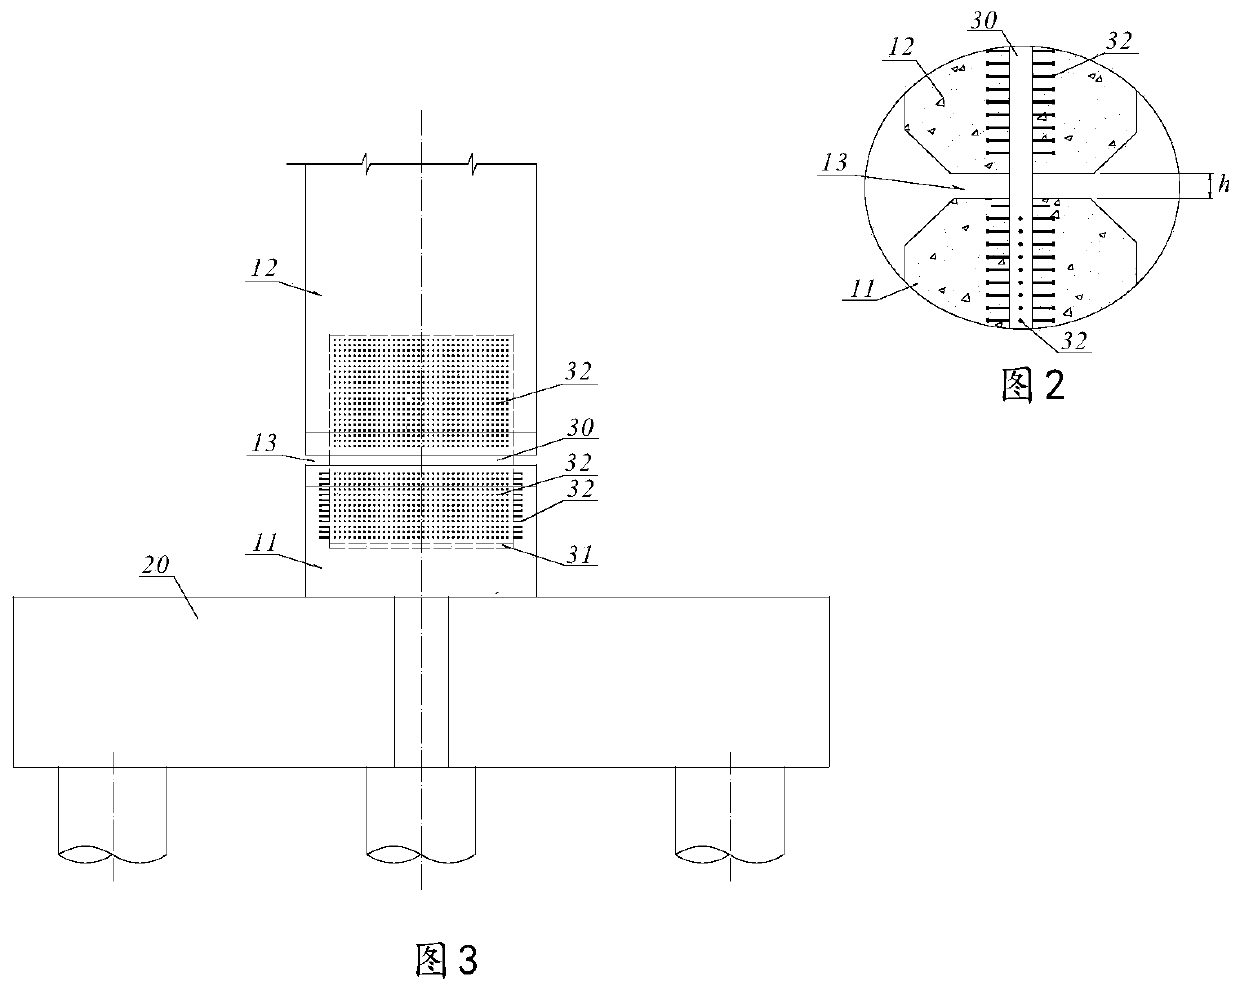 Short pier rigid-frame bridge pier bottom structure with function of greatly reducing bearing bending moment